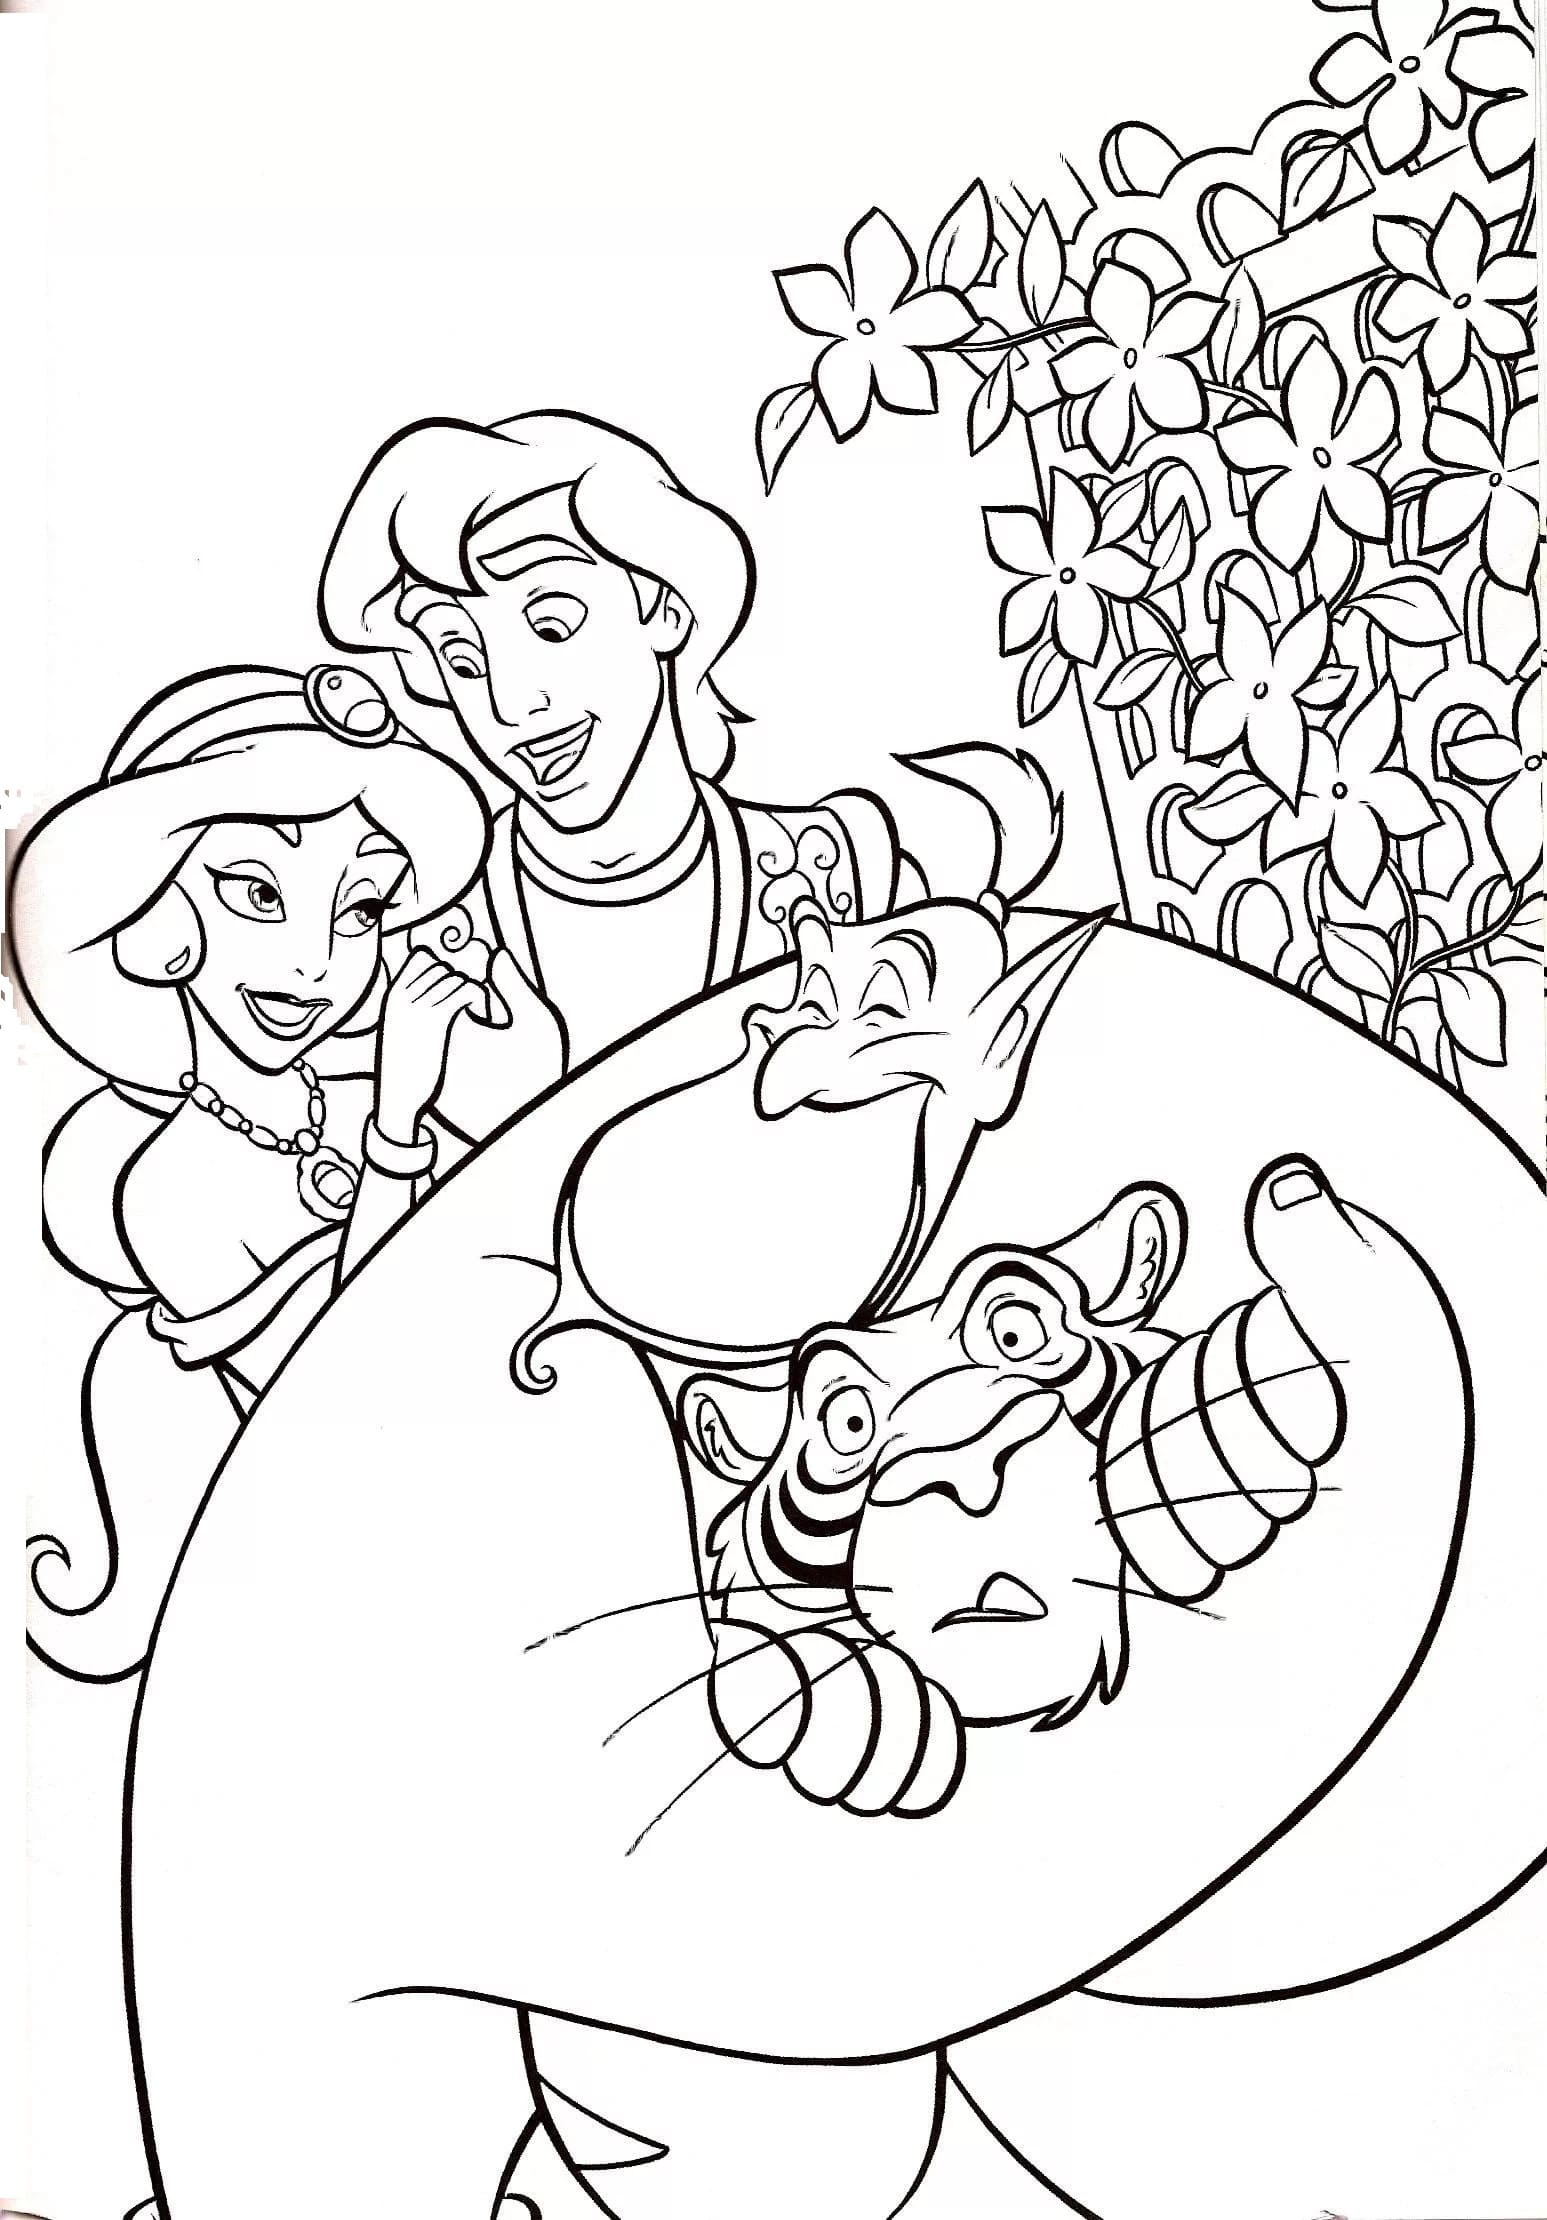 Aladdin Coloring Pages   20 images Free Printable